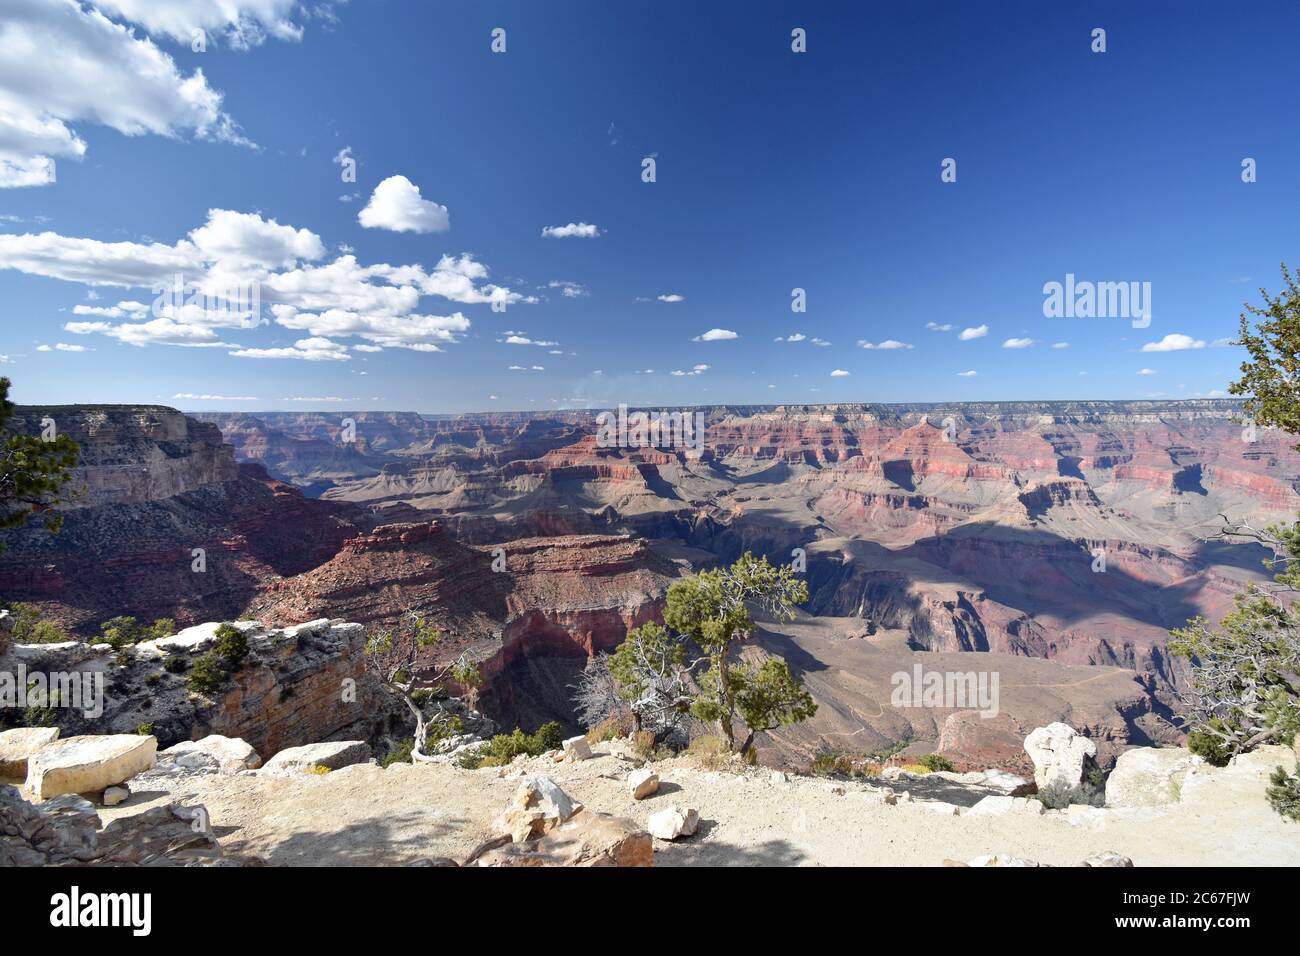 A scenic view of the Grand Canyon.  Red rock formations and green trees near the rim are visible. The south rim trail path is visible at the bottom. Stock Photo